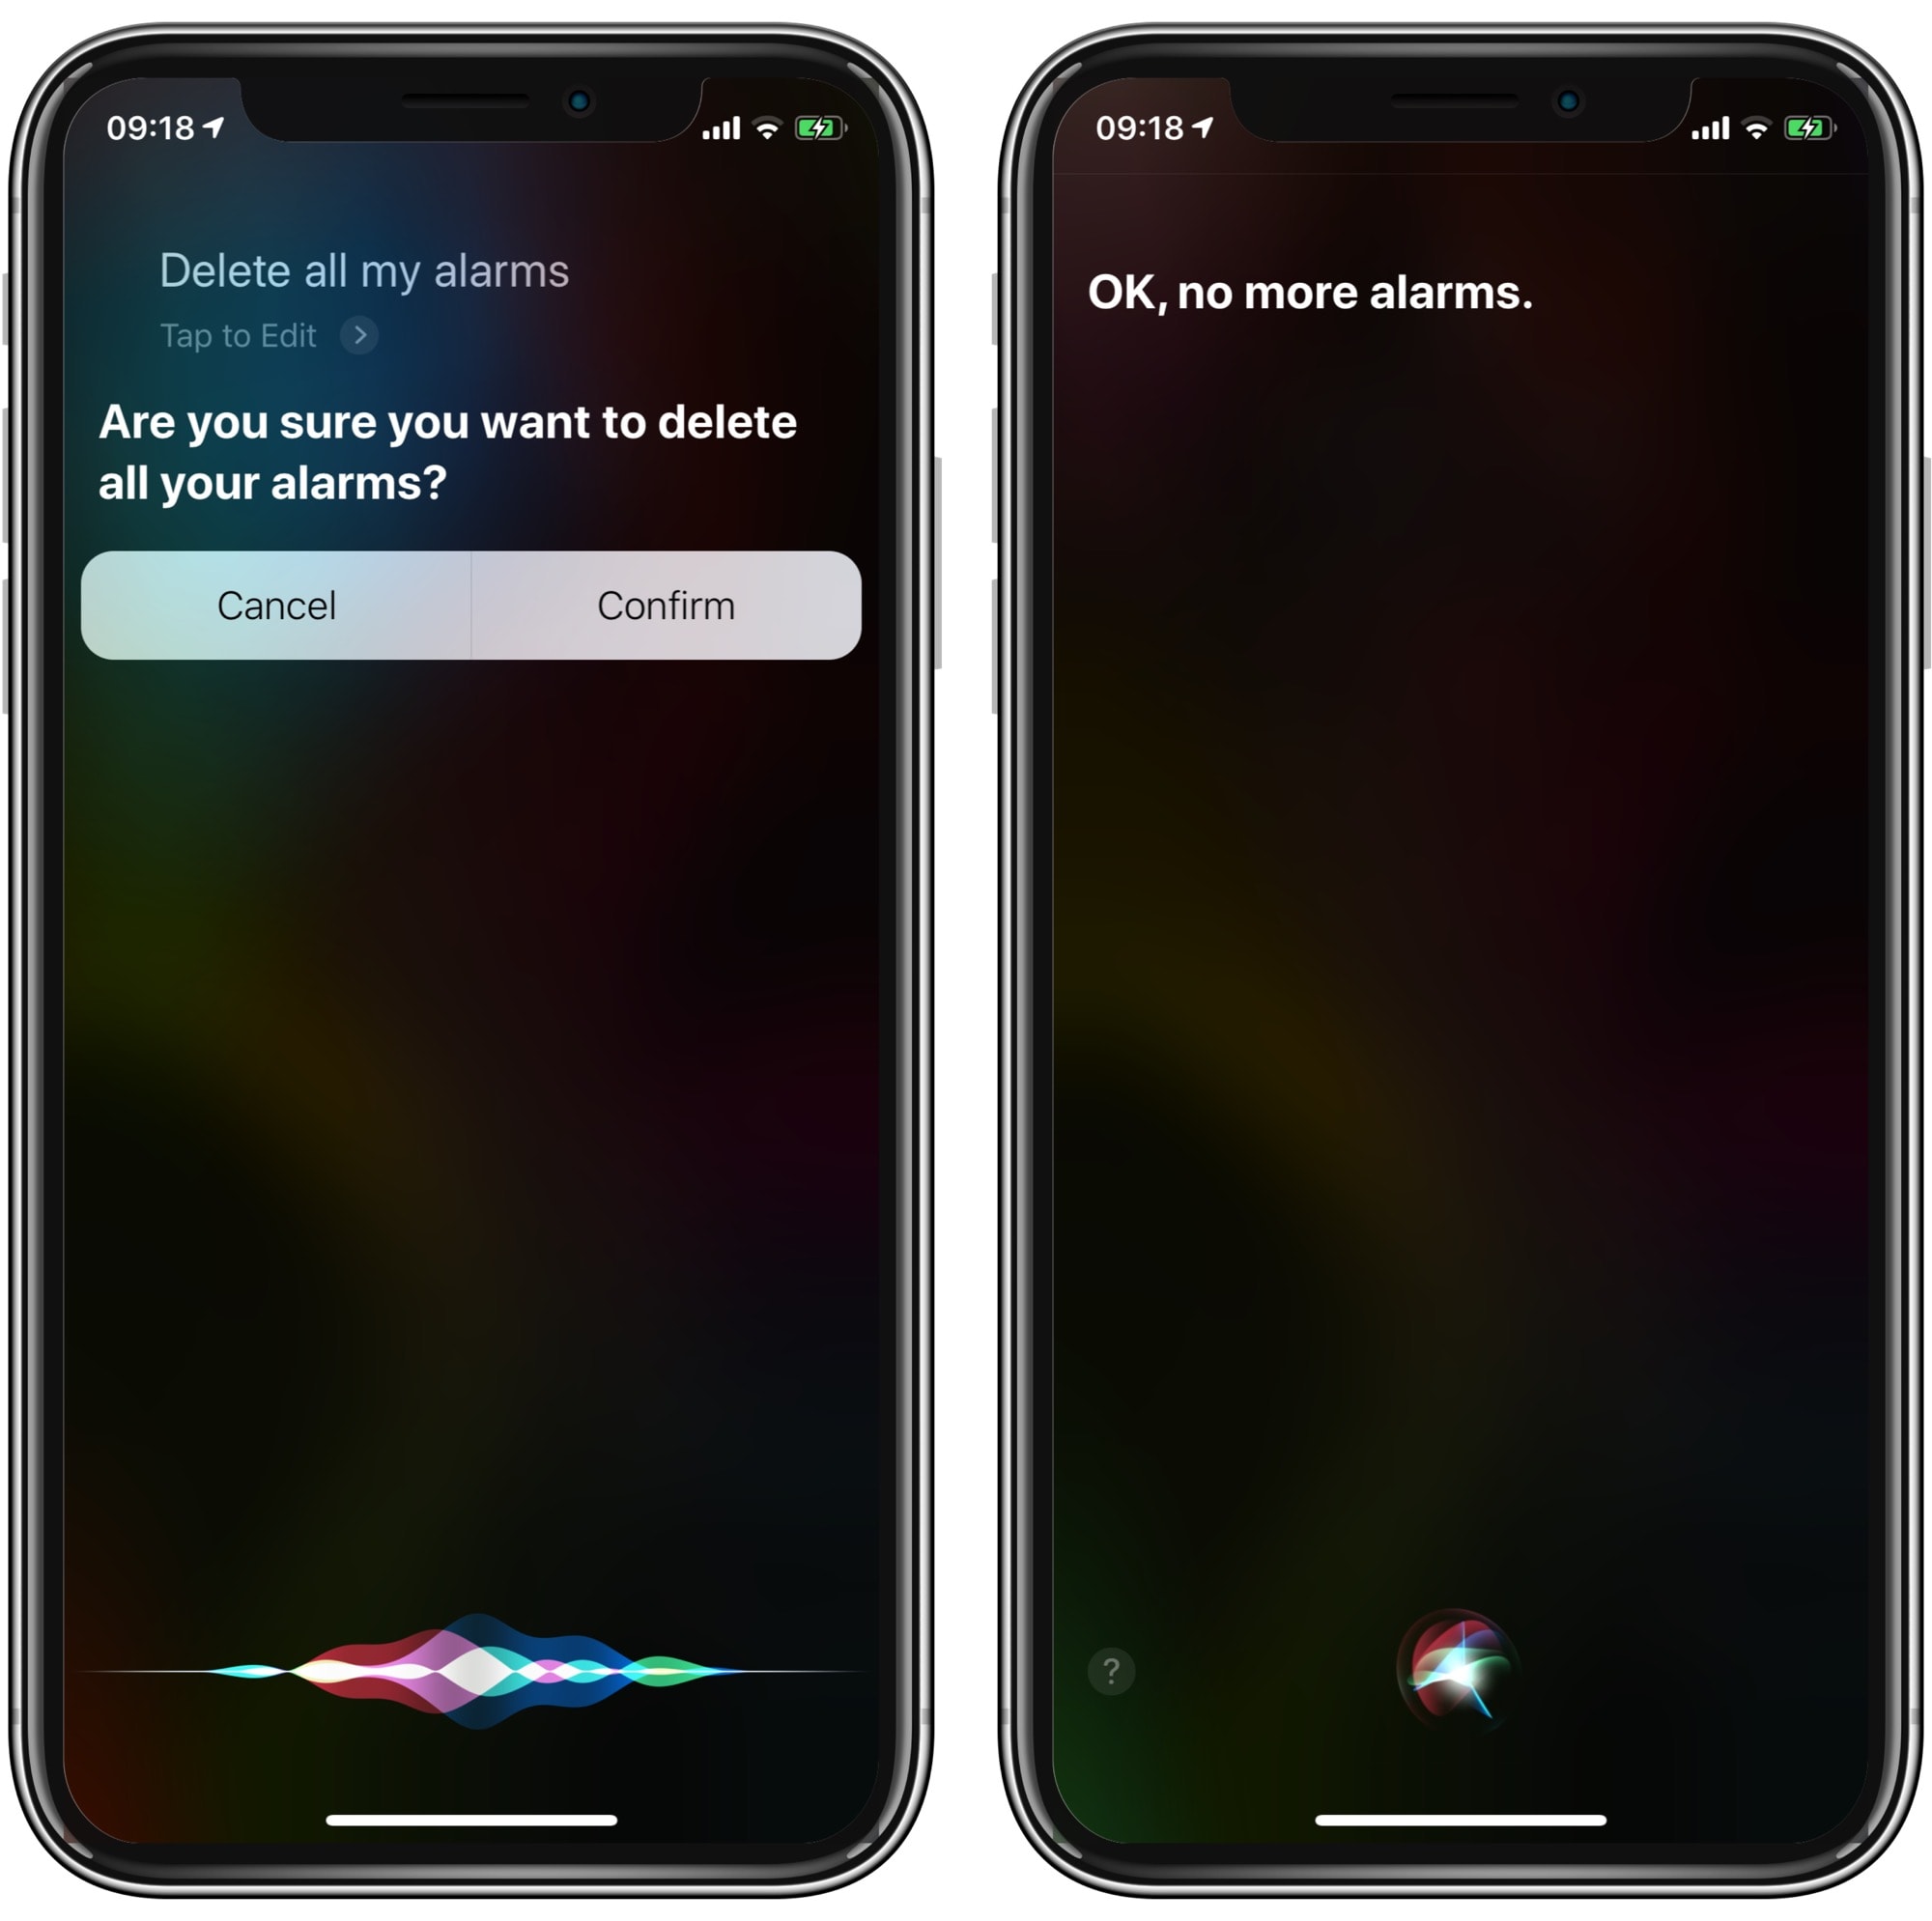 Siri can delete all your alarms in one go.